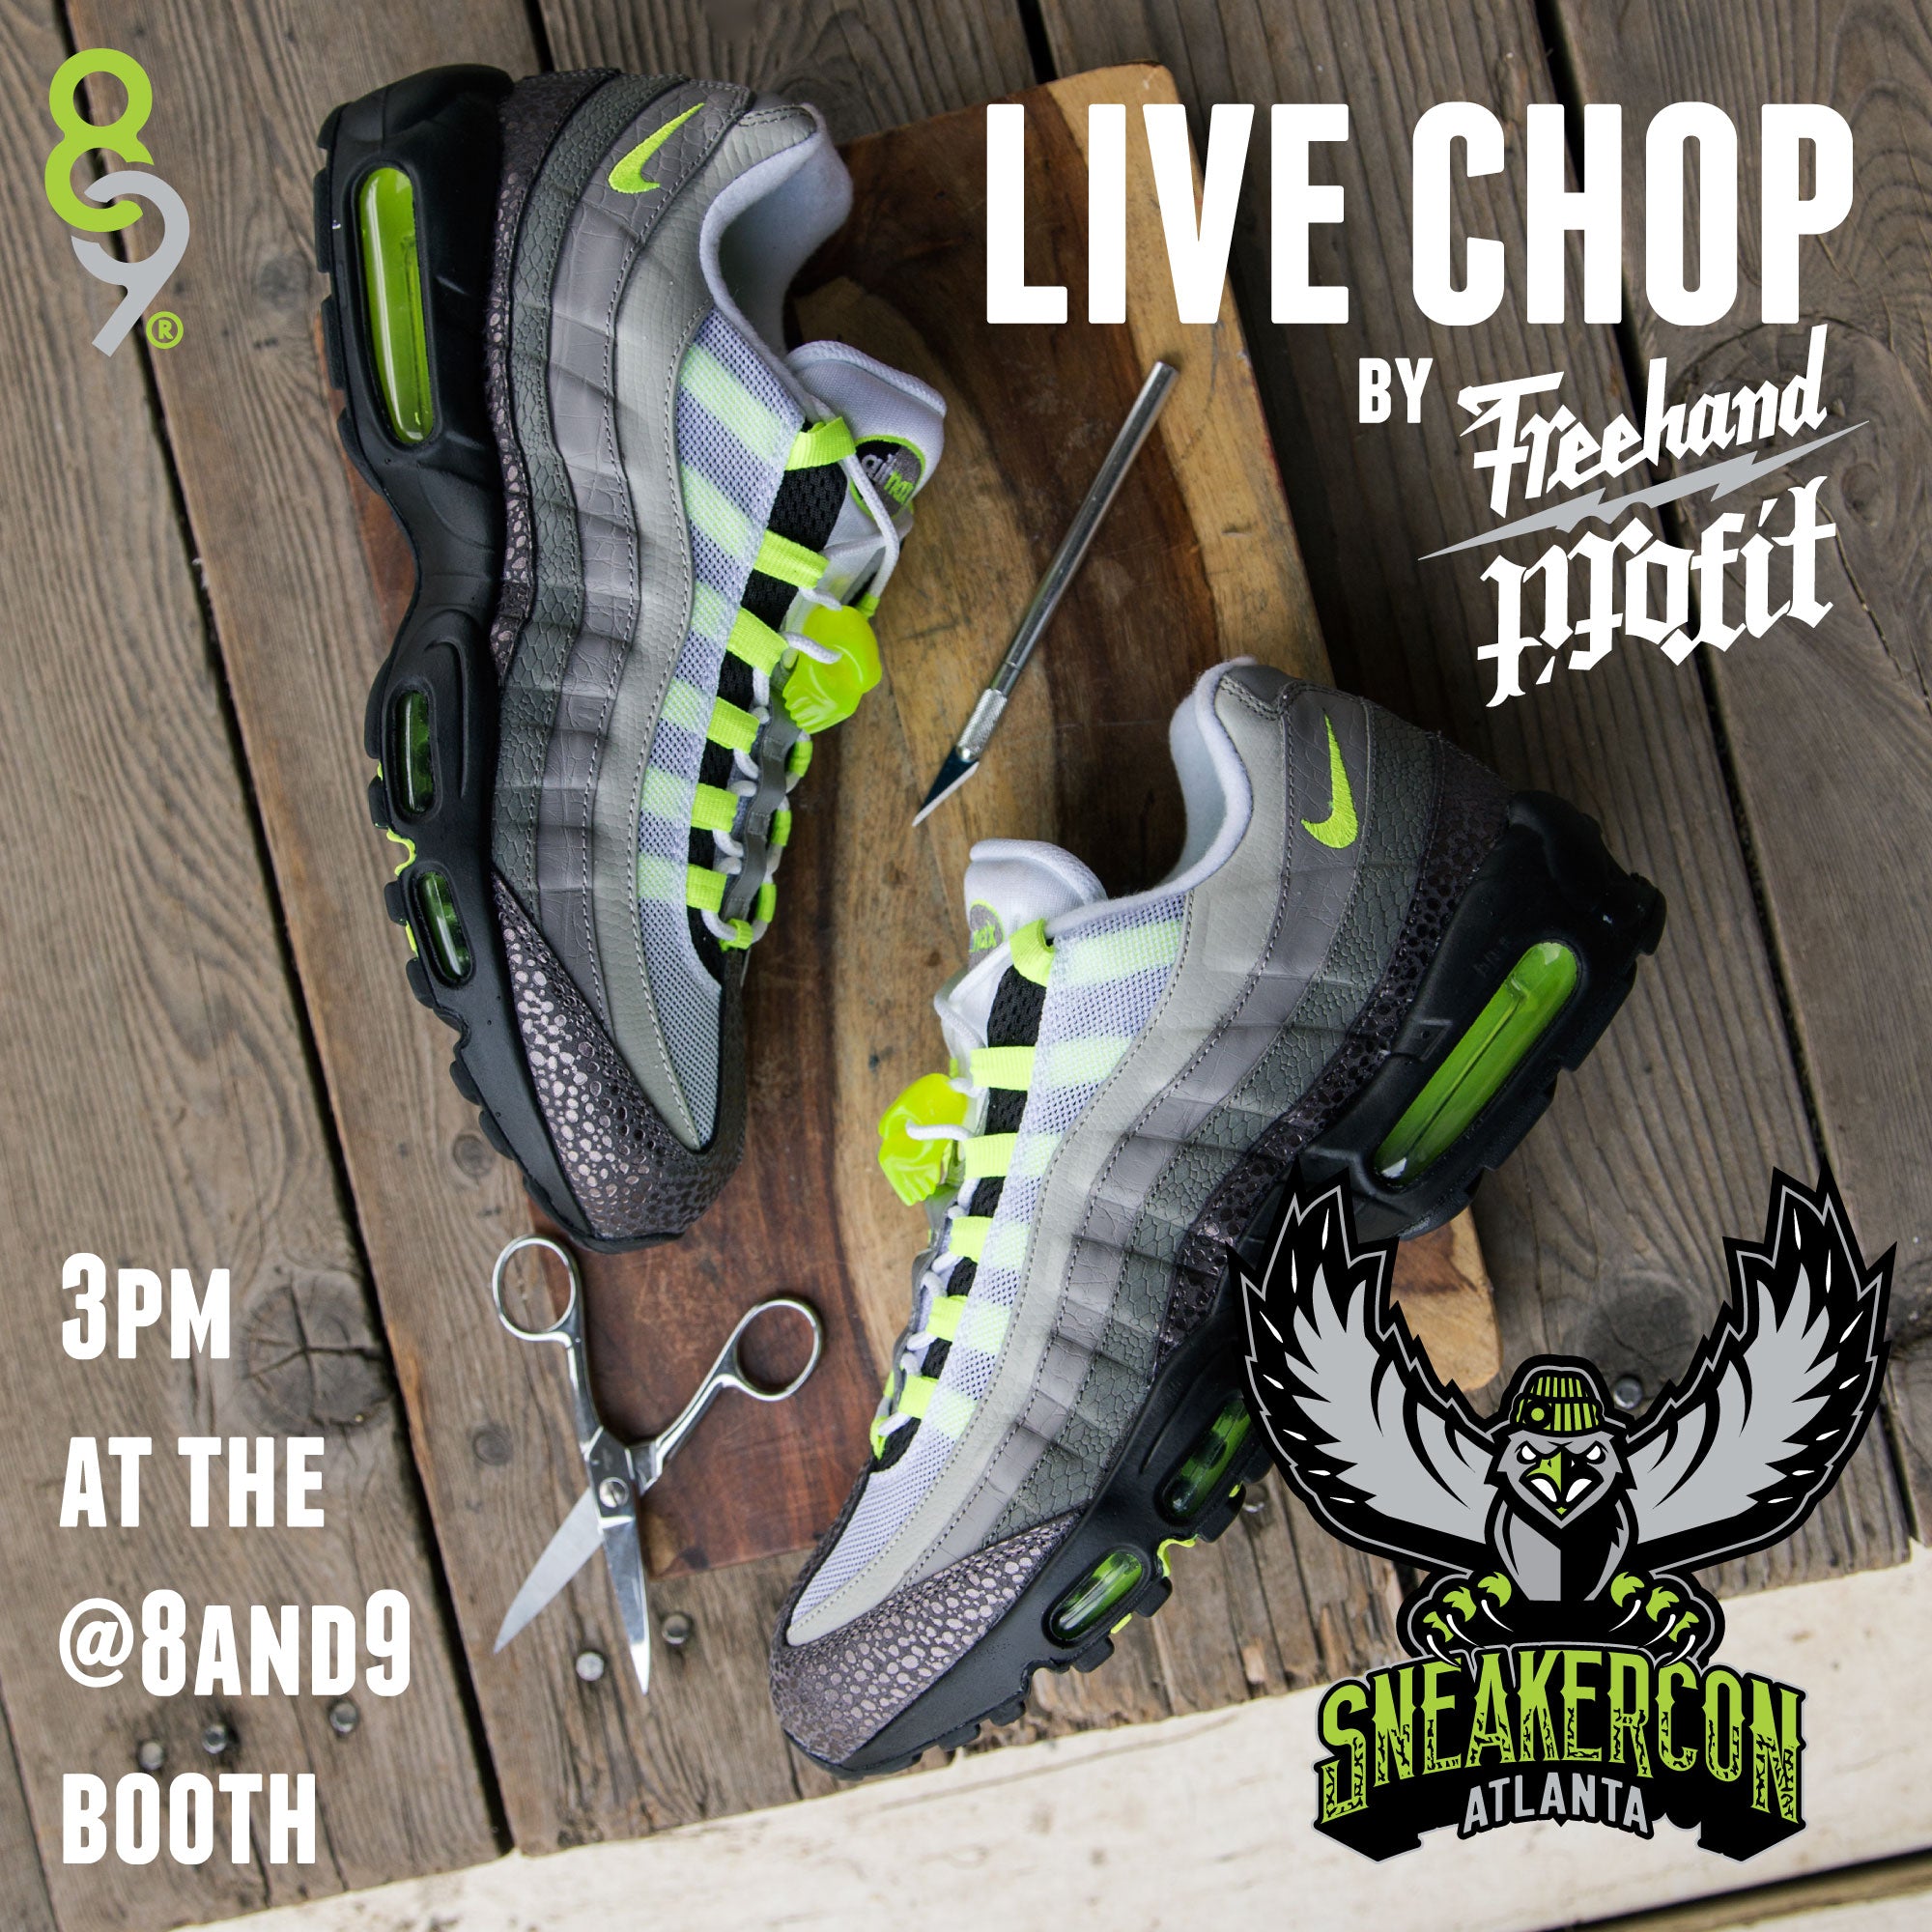 sneaker con freehand profit live chop 8and9 atlanta 2015